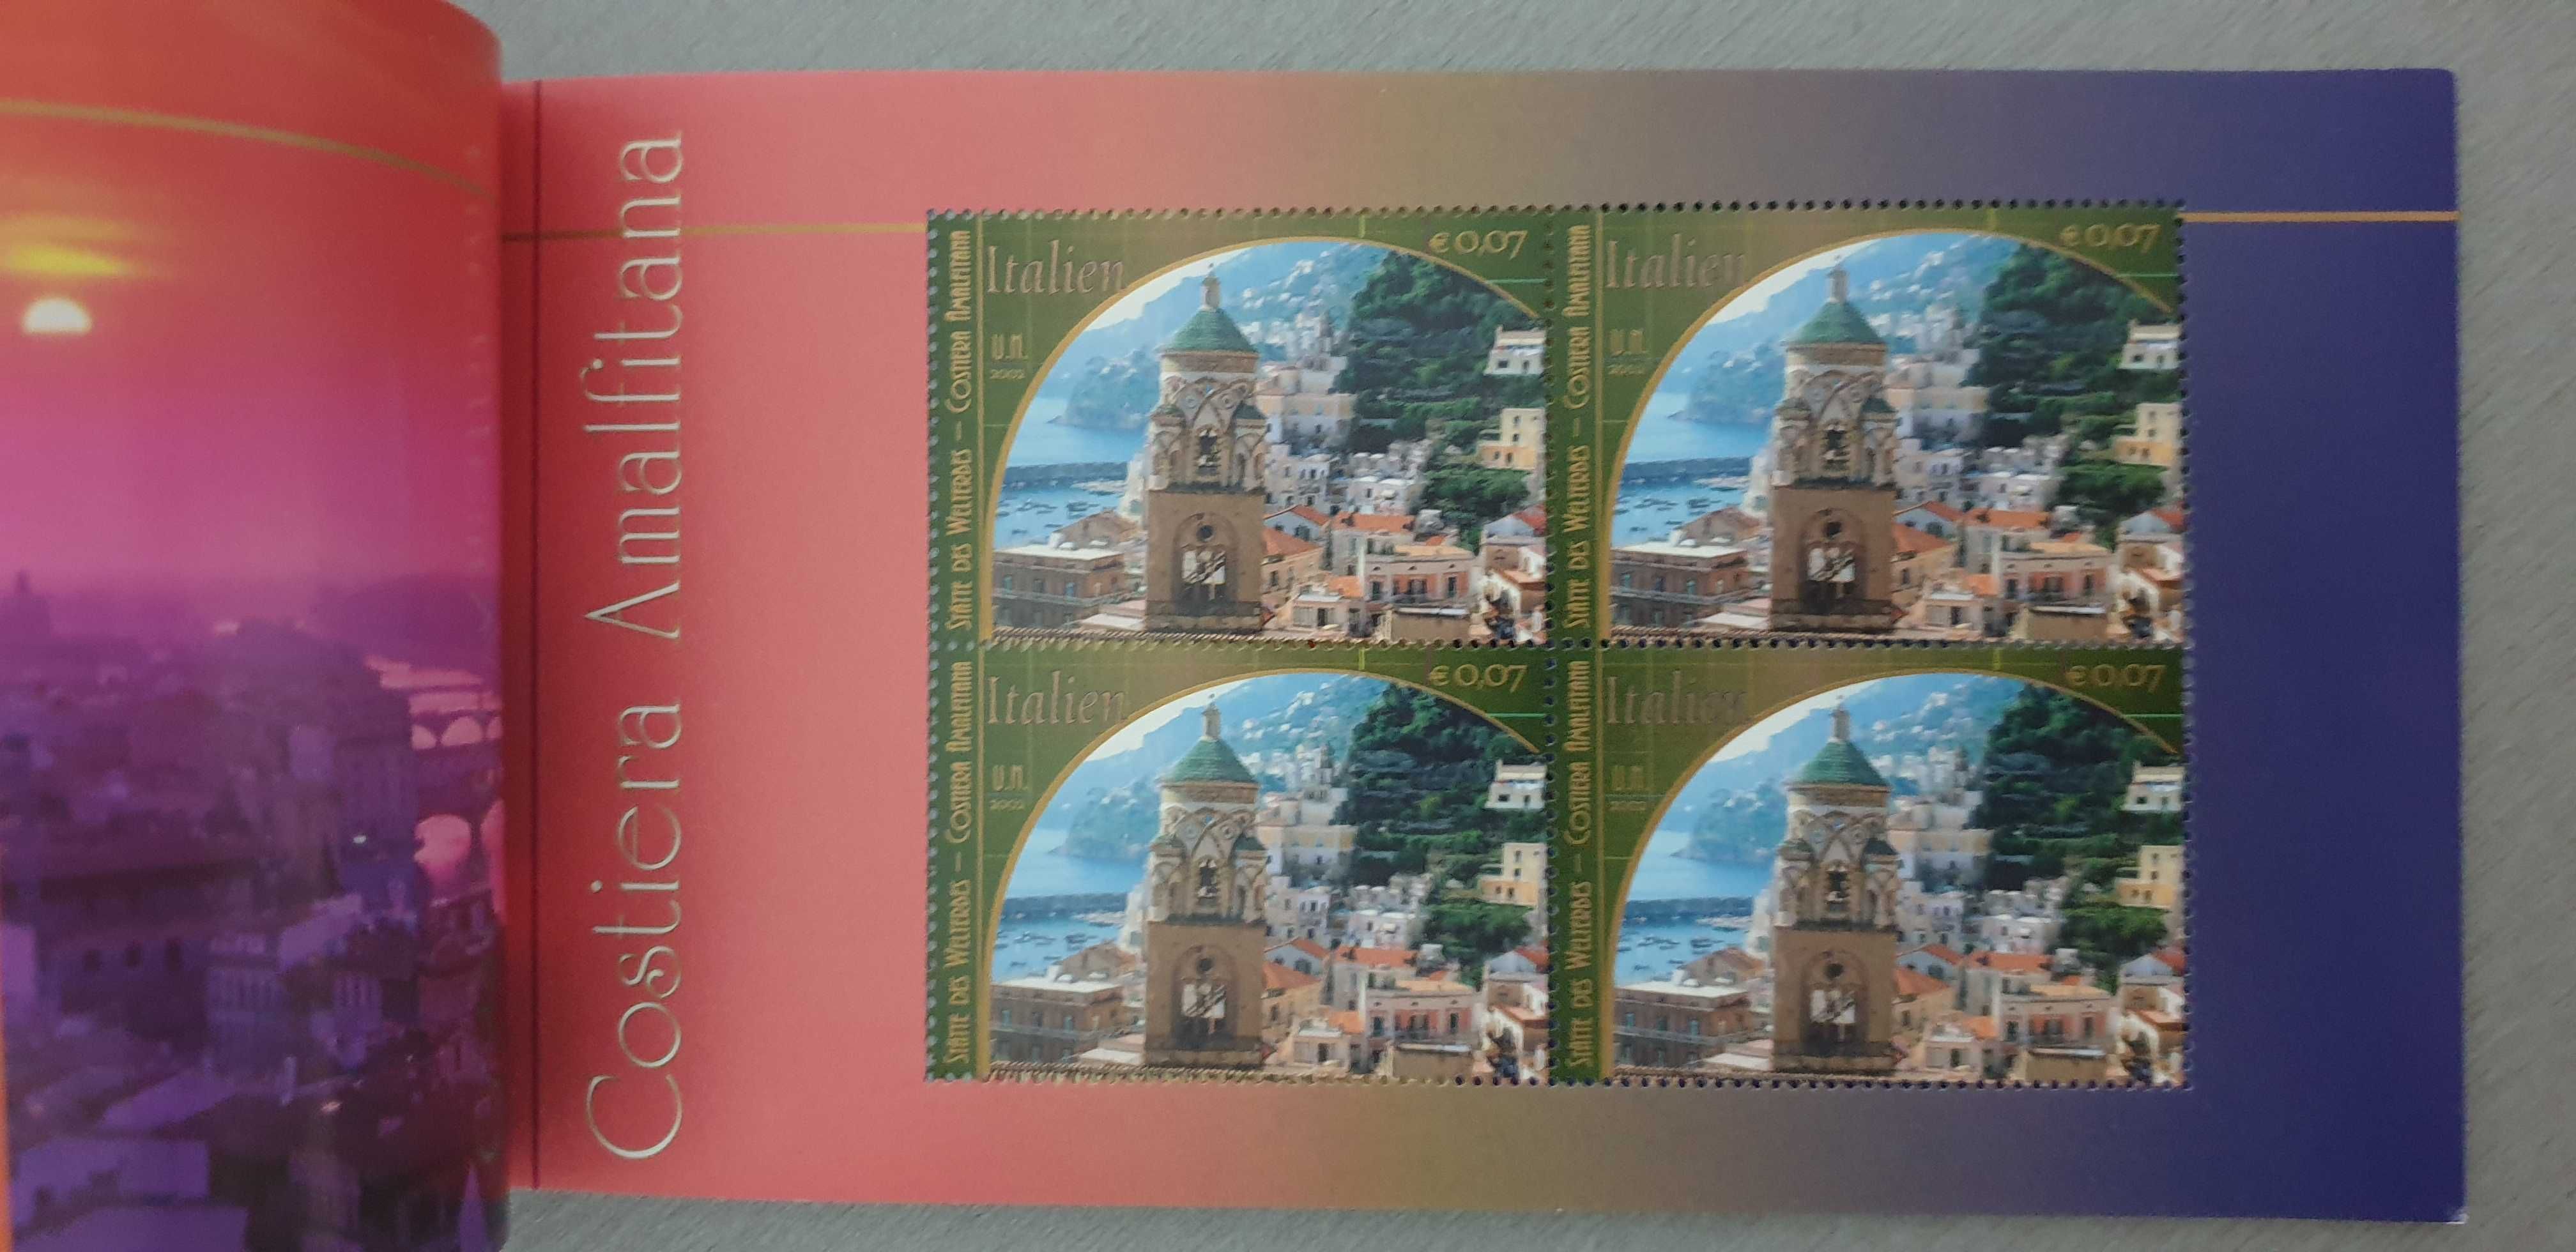 24 timbre din colectie Italy World Heritage (2002)